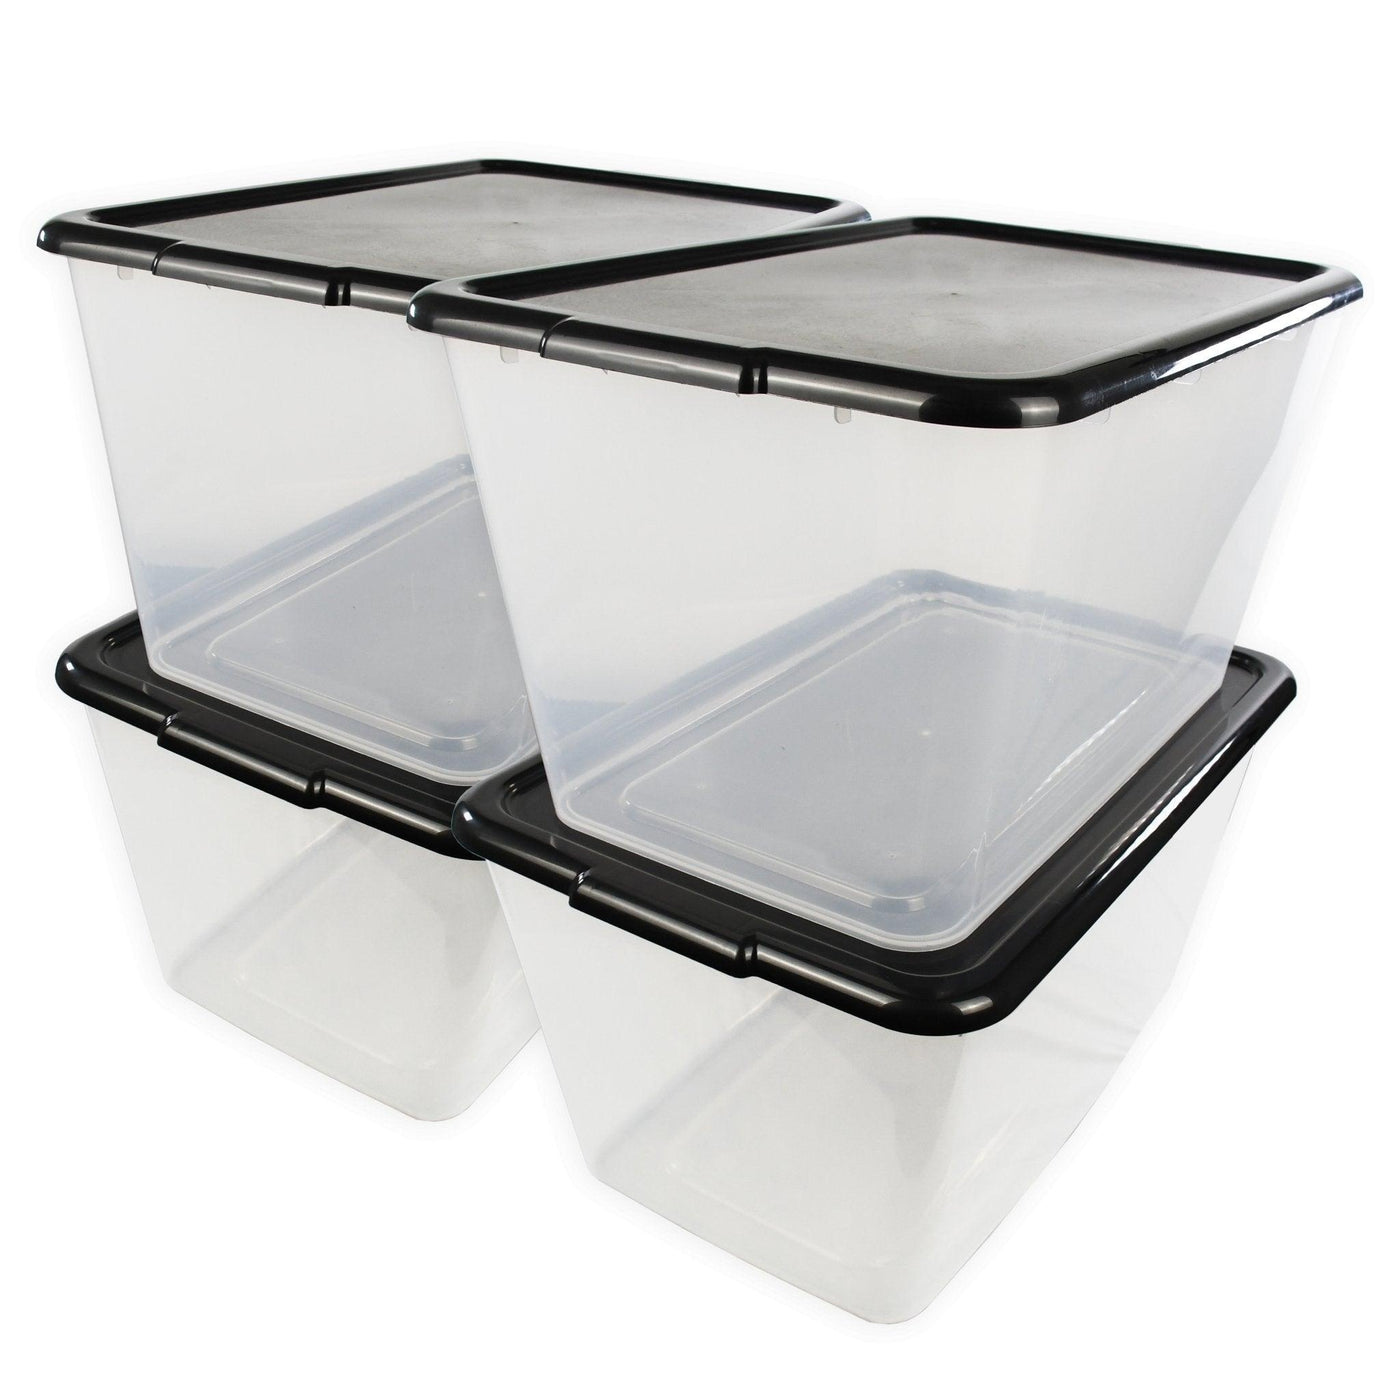 SimplyKleen 14.5-gal. Reusable Stacking Plastic Storage Containers Clear with Lids, 9 Color Options(Pack of 4)